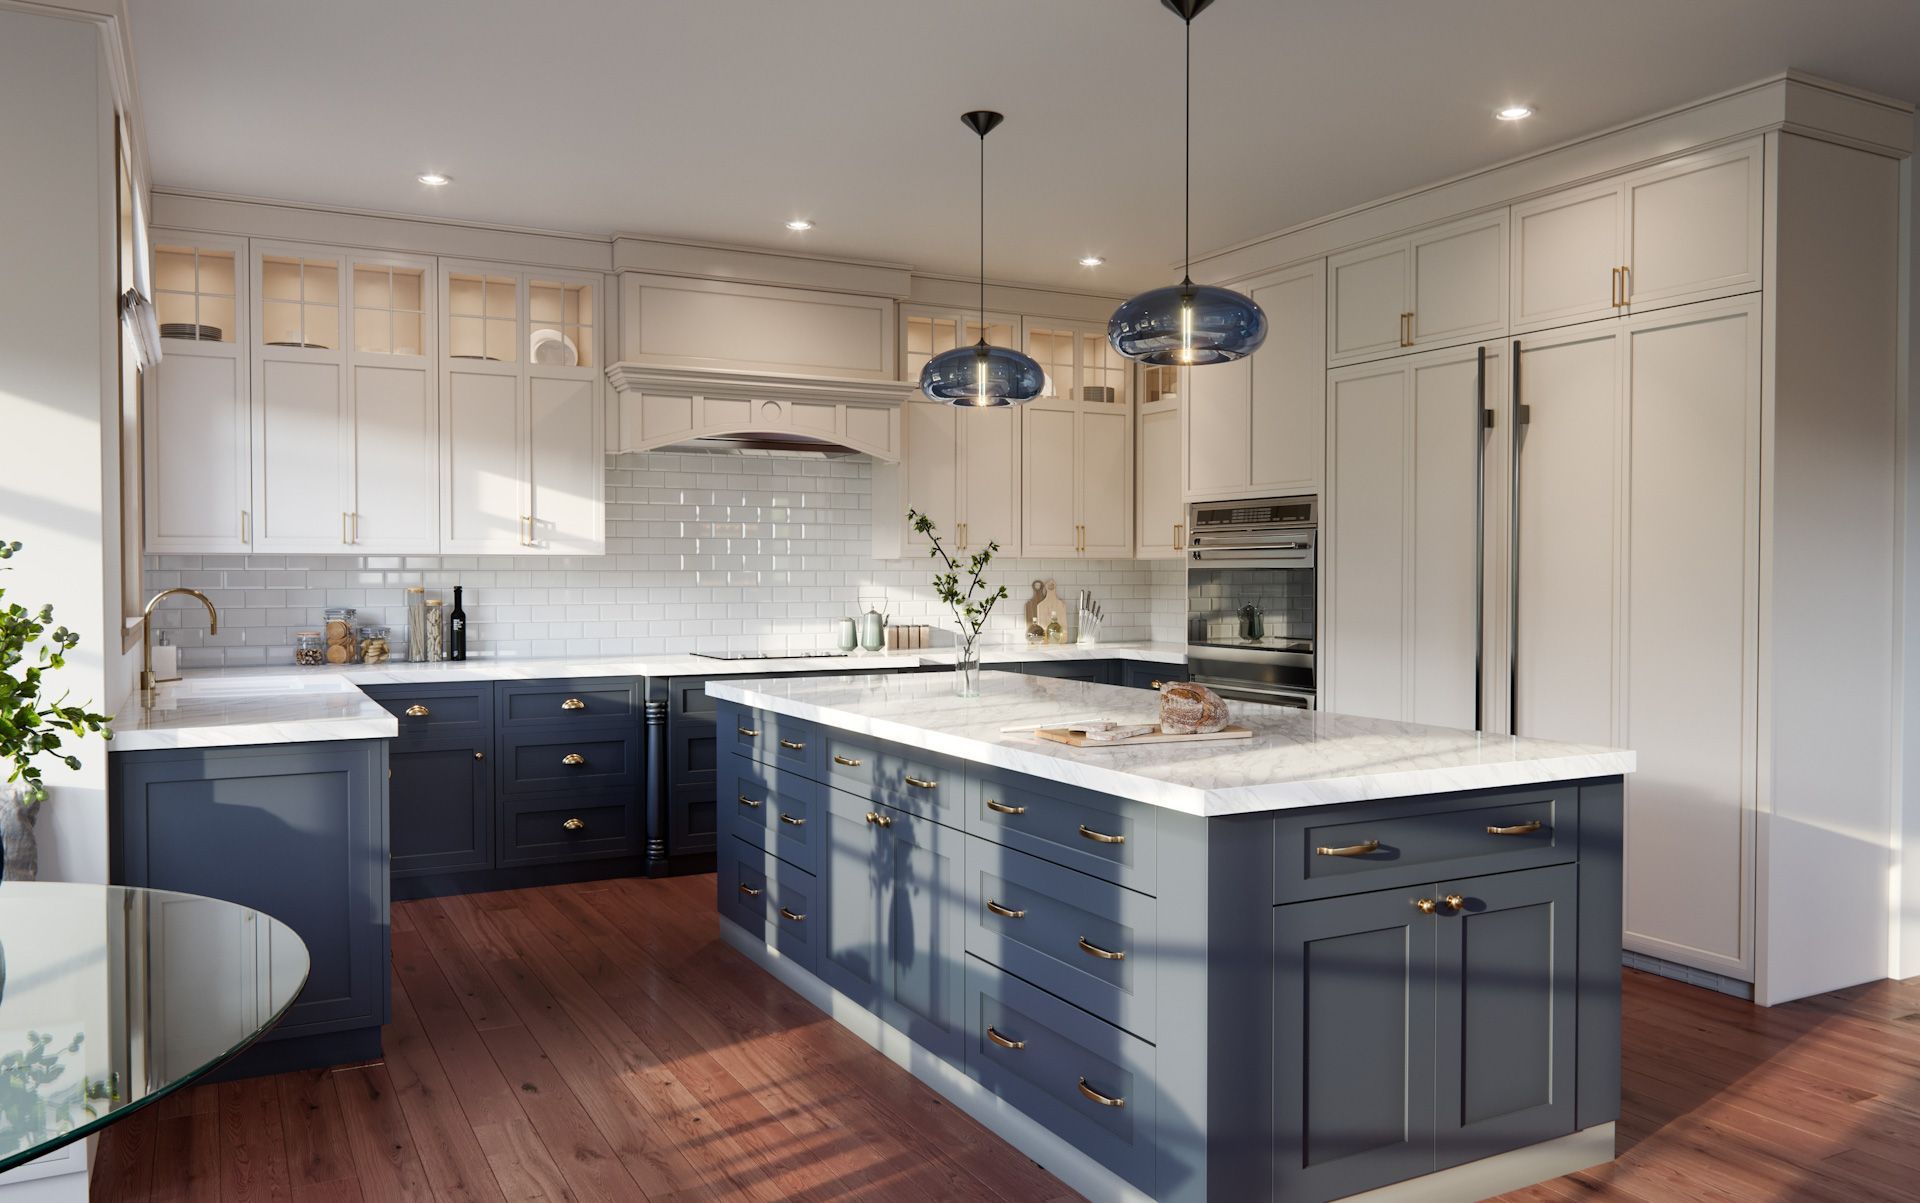 A kitchen with blue cabinets and white cabinets and a large island in the middle.